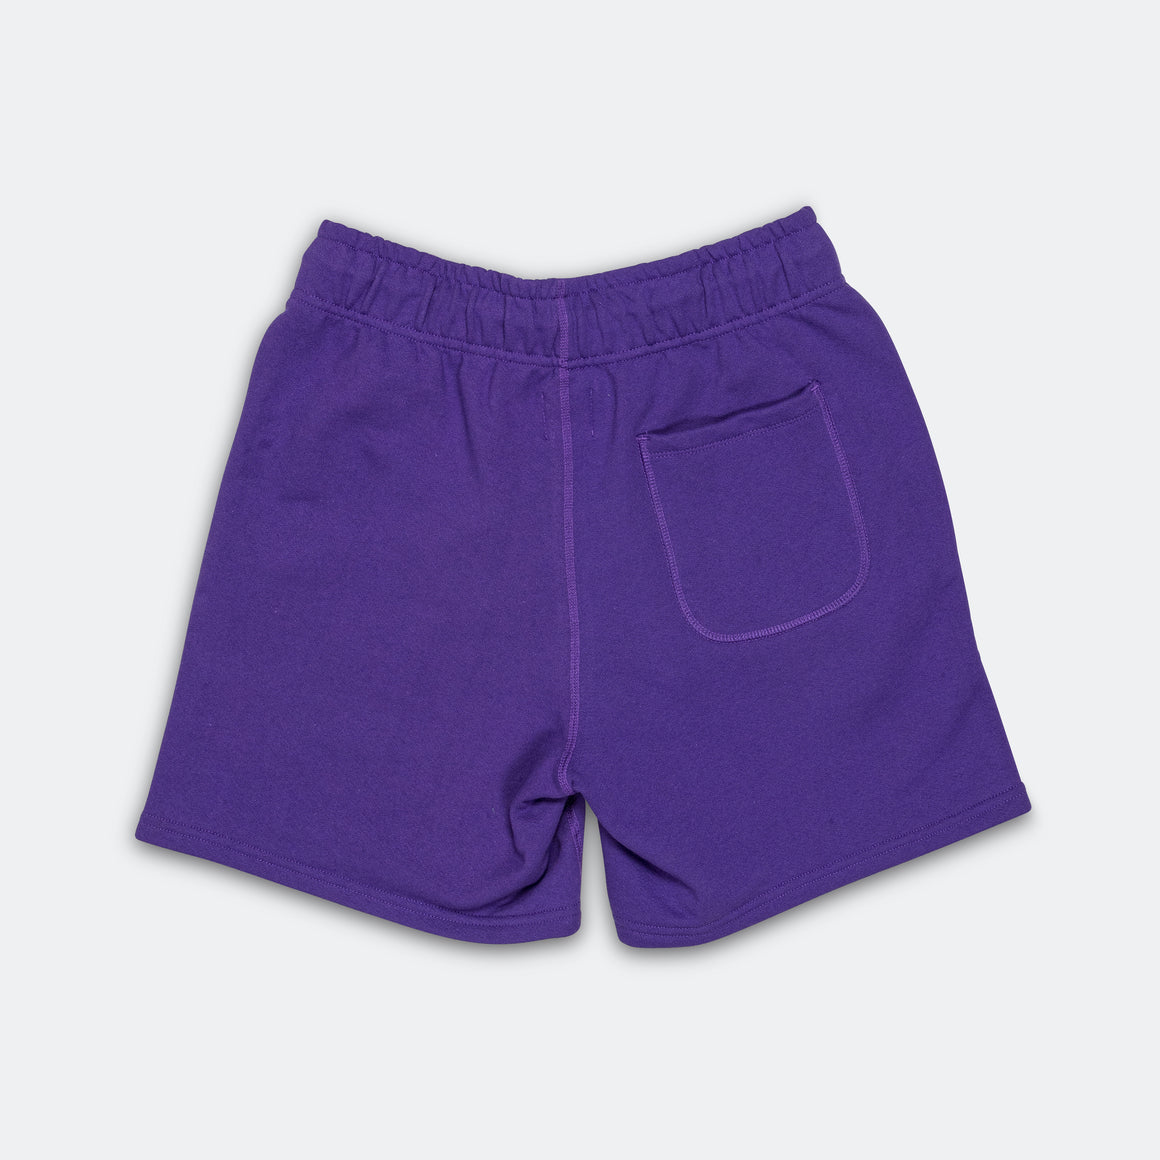 MADE in USA Sweat Short - Prism Purple